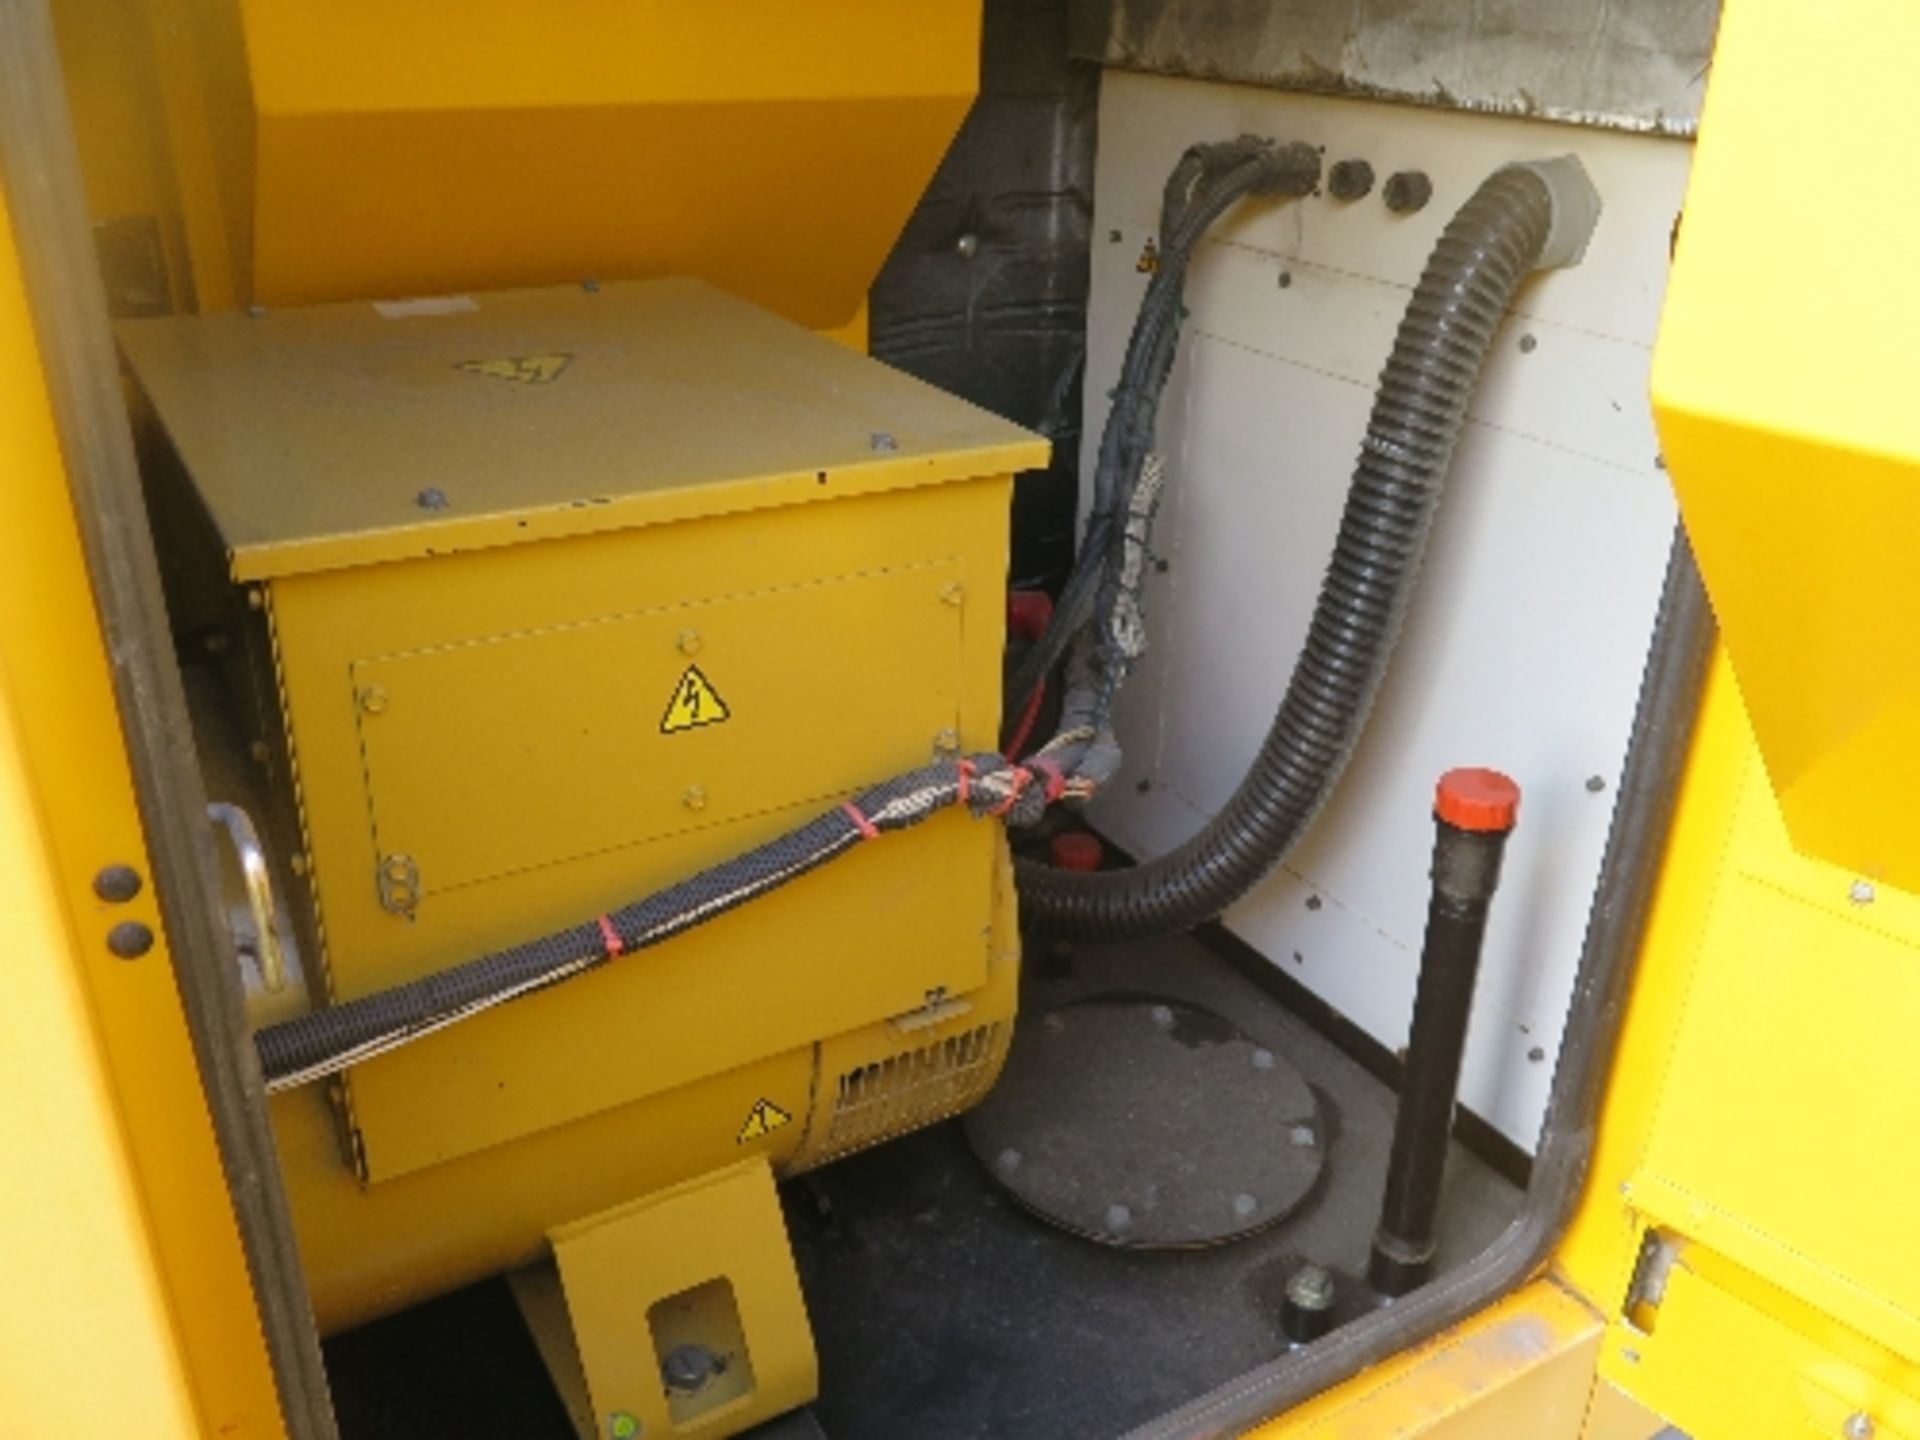 Caterpillar XQE100 generator 17983 hrs 158071
PERKINS - RUNS AND MAKES POWER
ALL LOTS are SOLD - Image 4 of 6